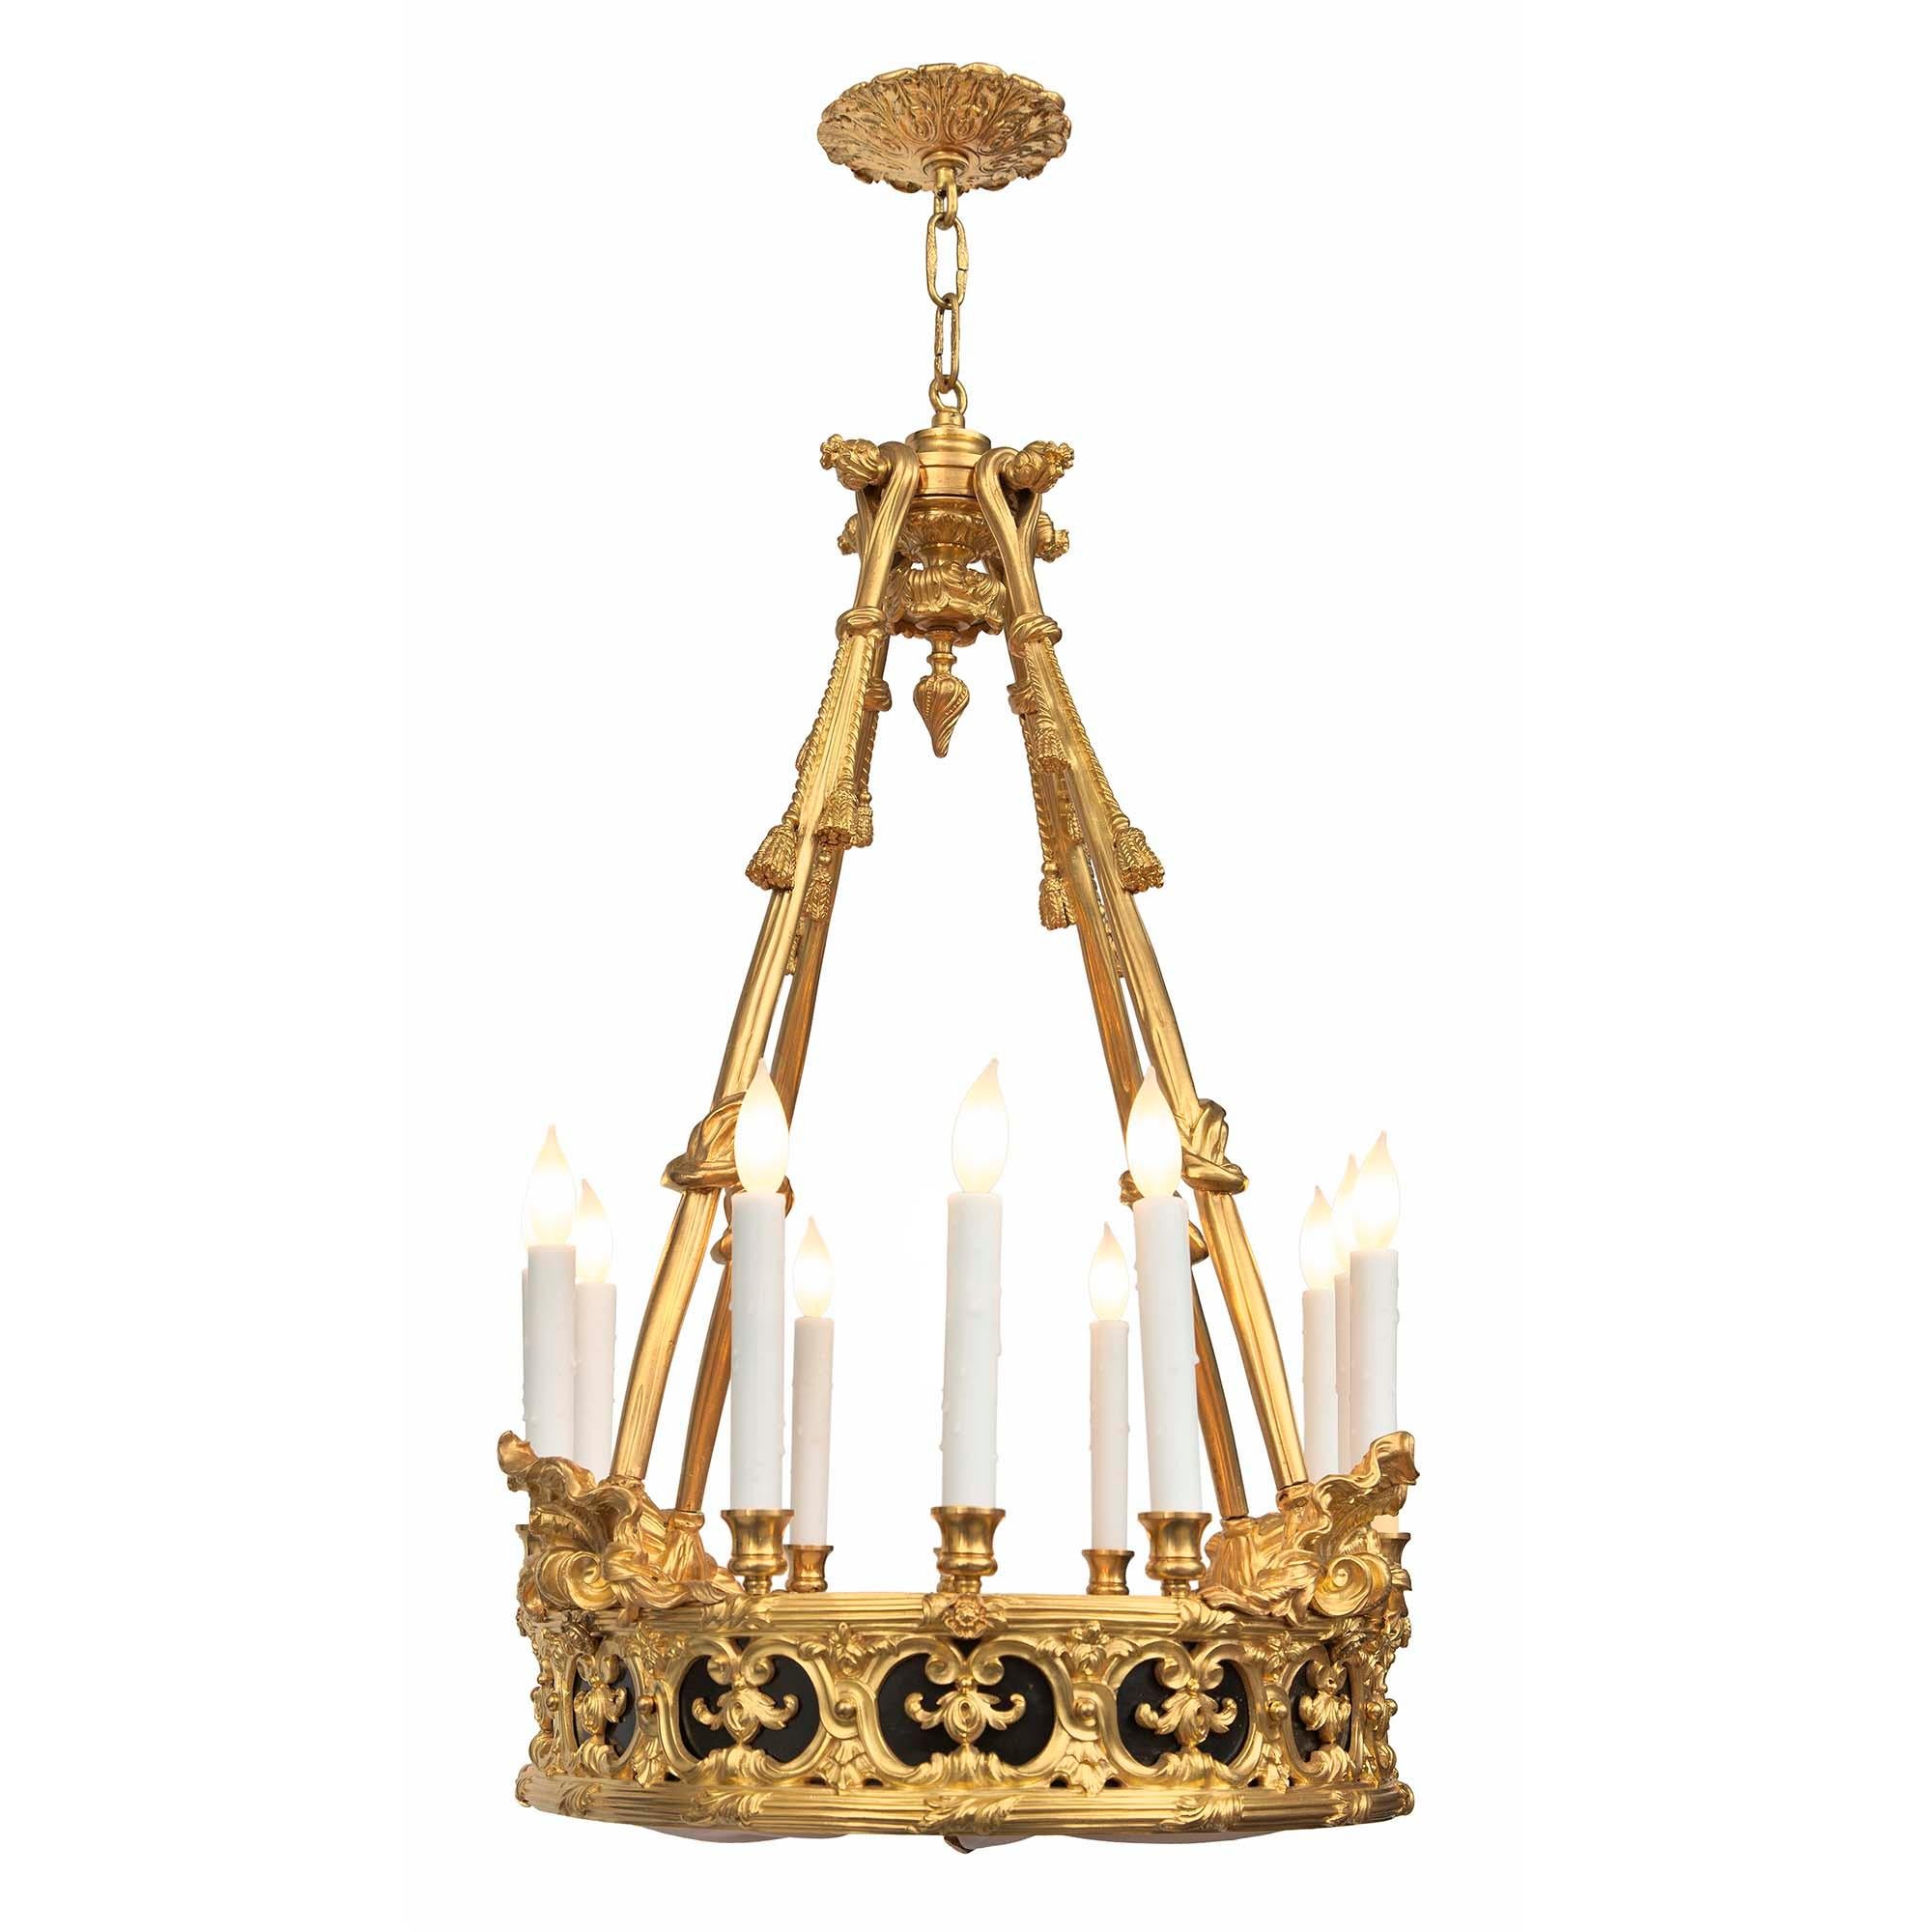 A spectacular French 19th century Louis XVI st. ormolu and patinated bronze chandelier. The twelve arm chandelier is centered by a striking bottom ormolu finial with a pierced foliate design and elongated foliate movement gathering the silk